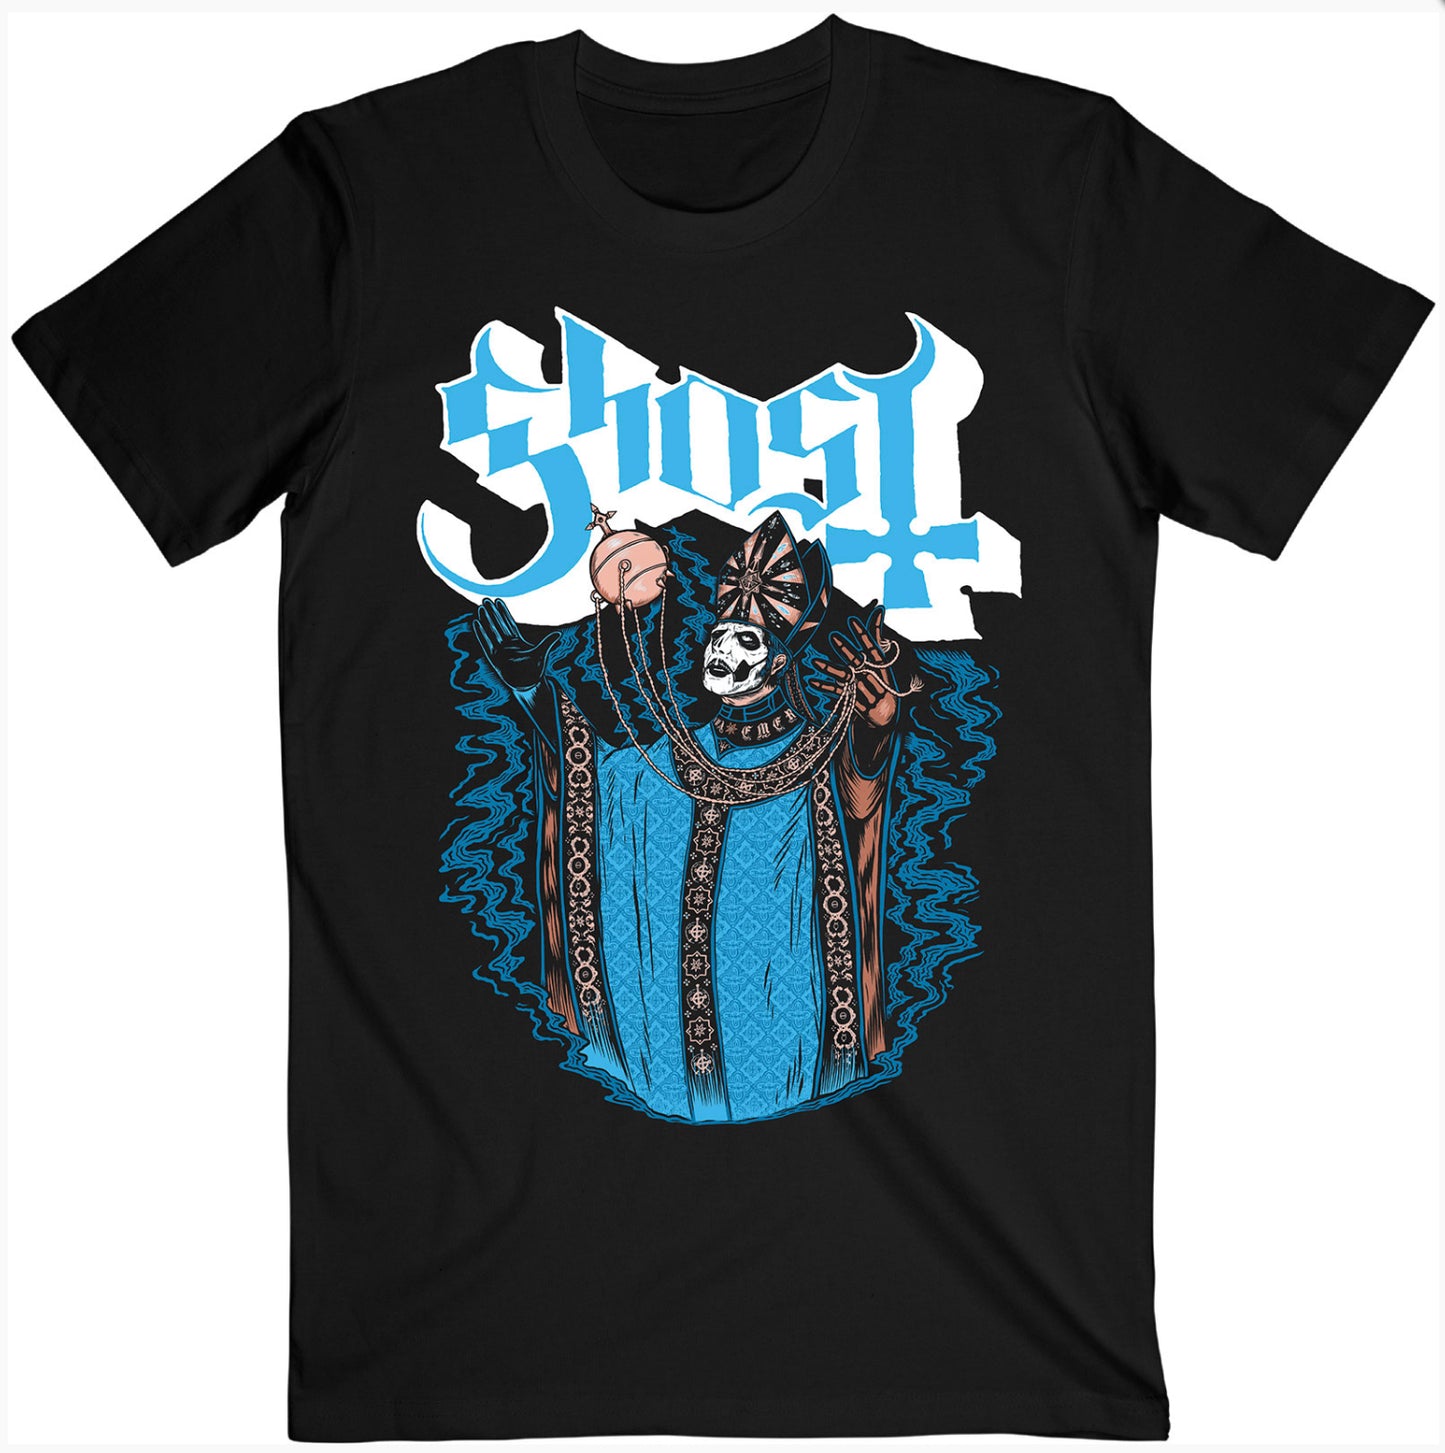 Ghost T-shirts